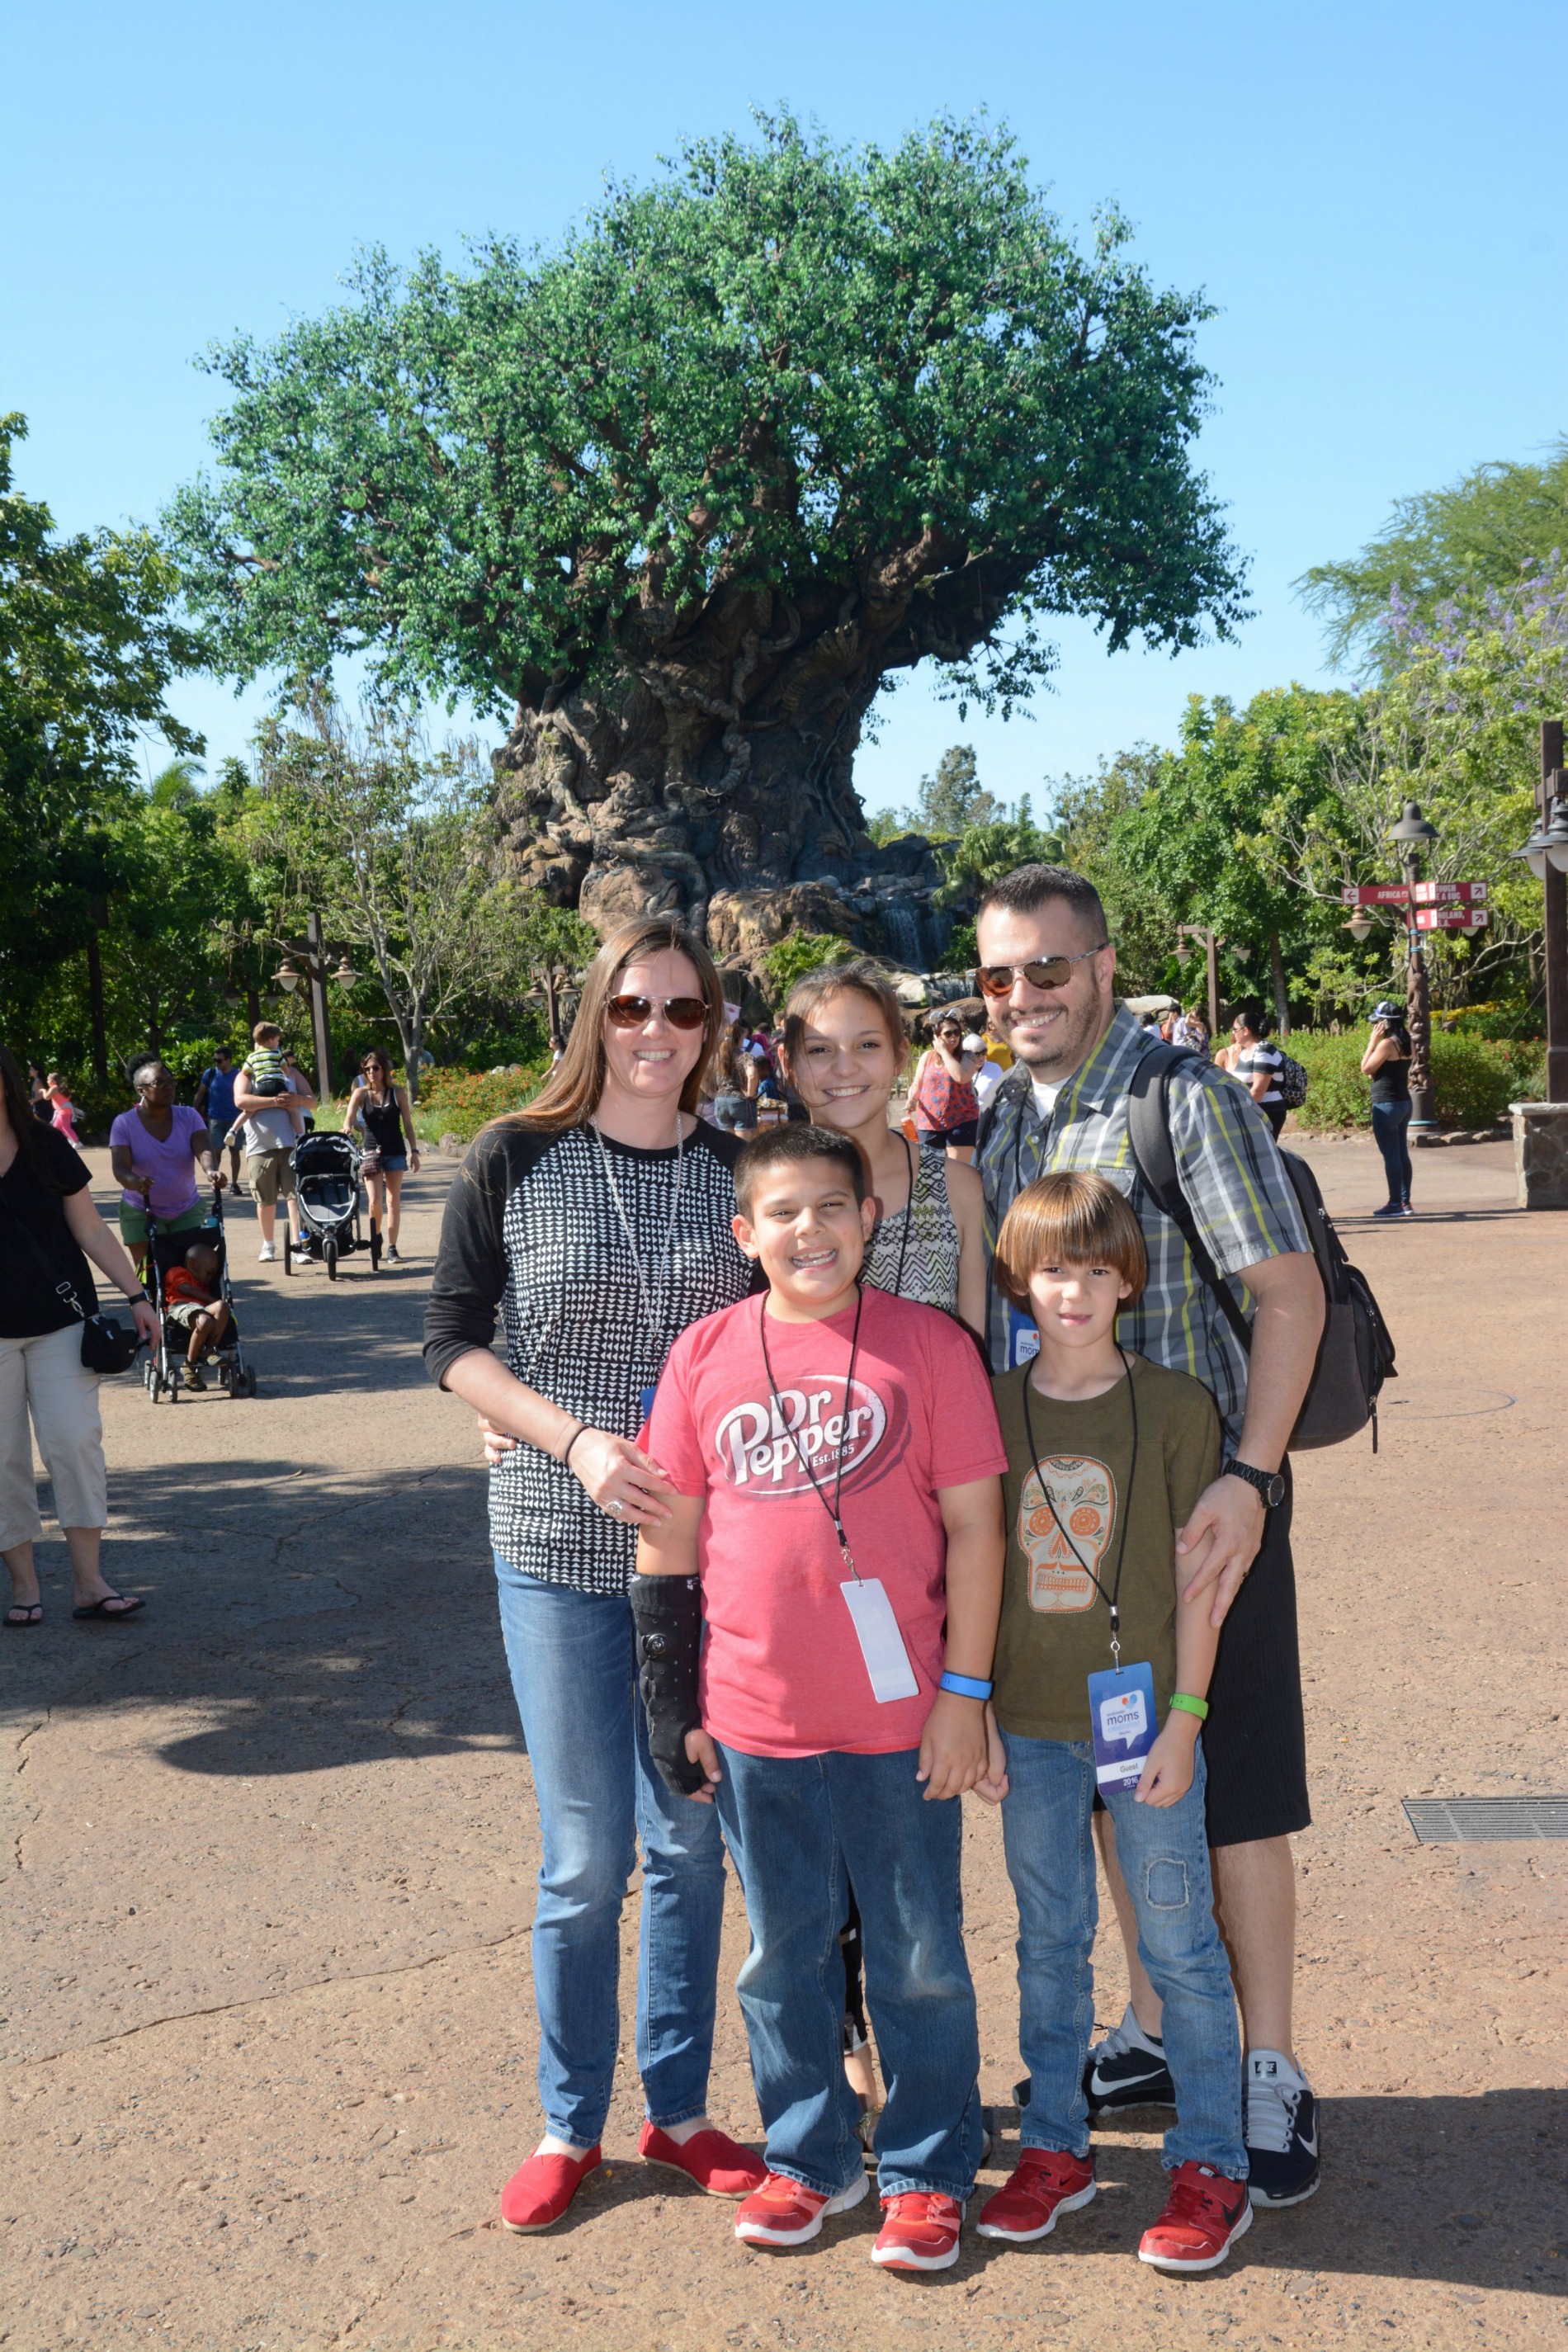 Take advantage of Disney's Photopass service while in the parks and enjoy the benefits of Memory Maker on your Disney vacation.